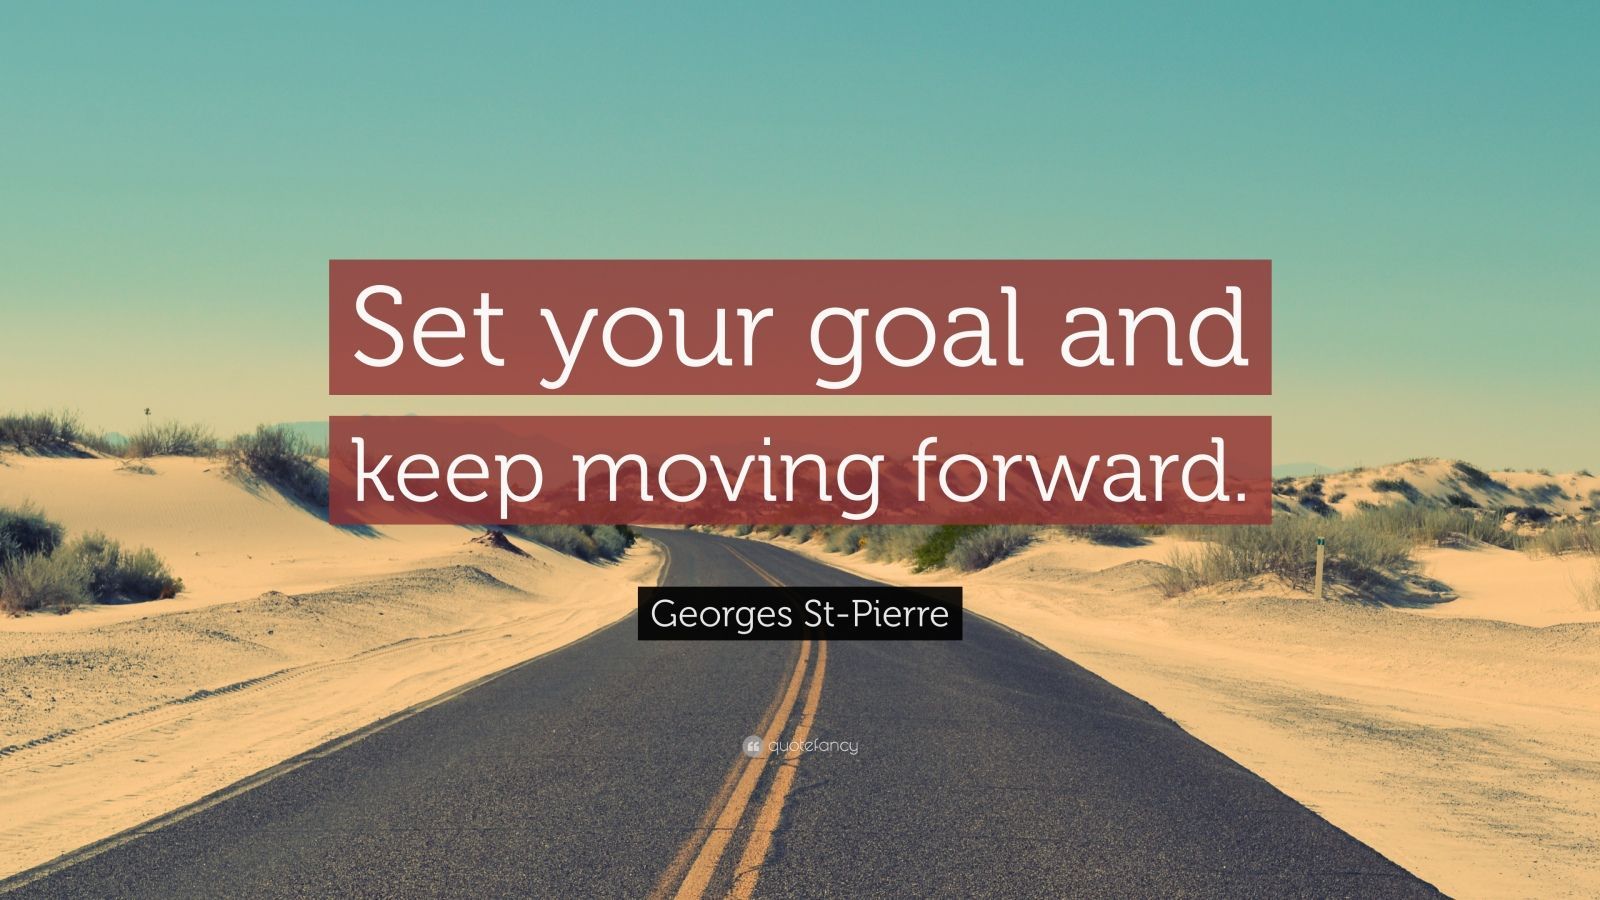 Georges St Pierre Quote: “Set Your Goal And Keep Moving Forward.” (7 Wallpaper)